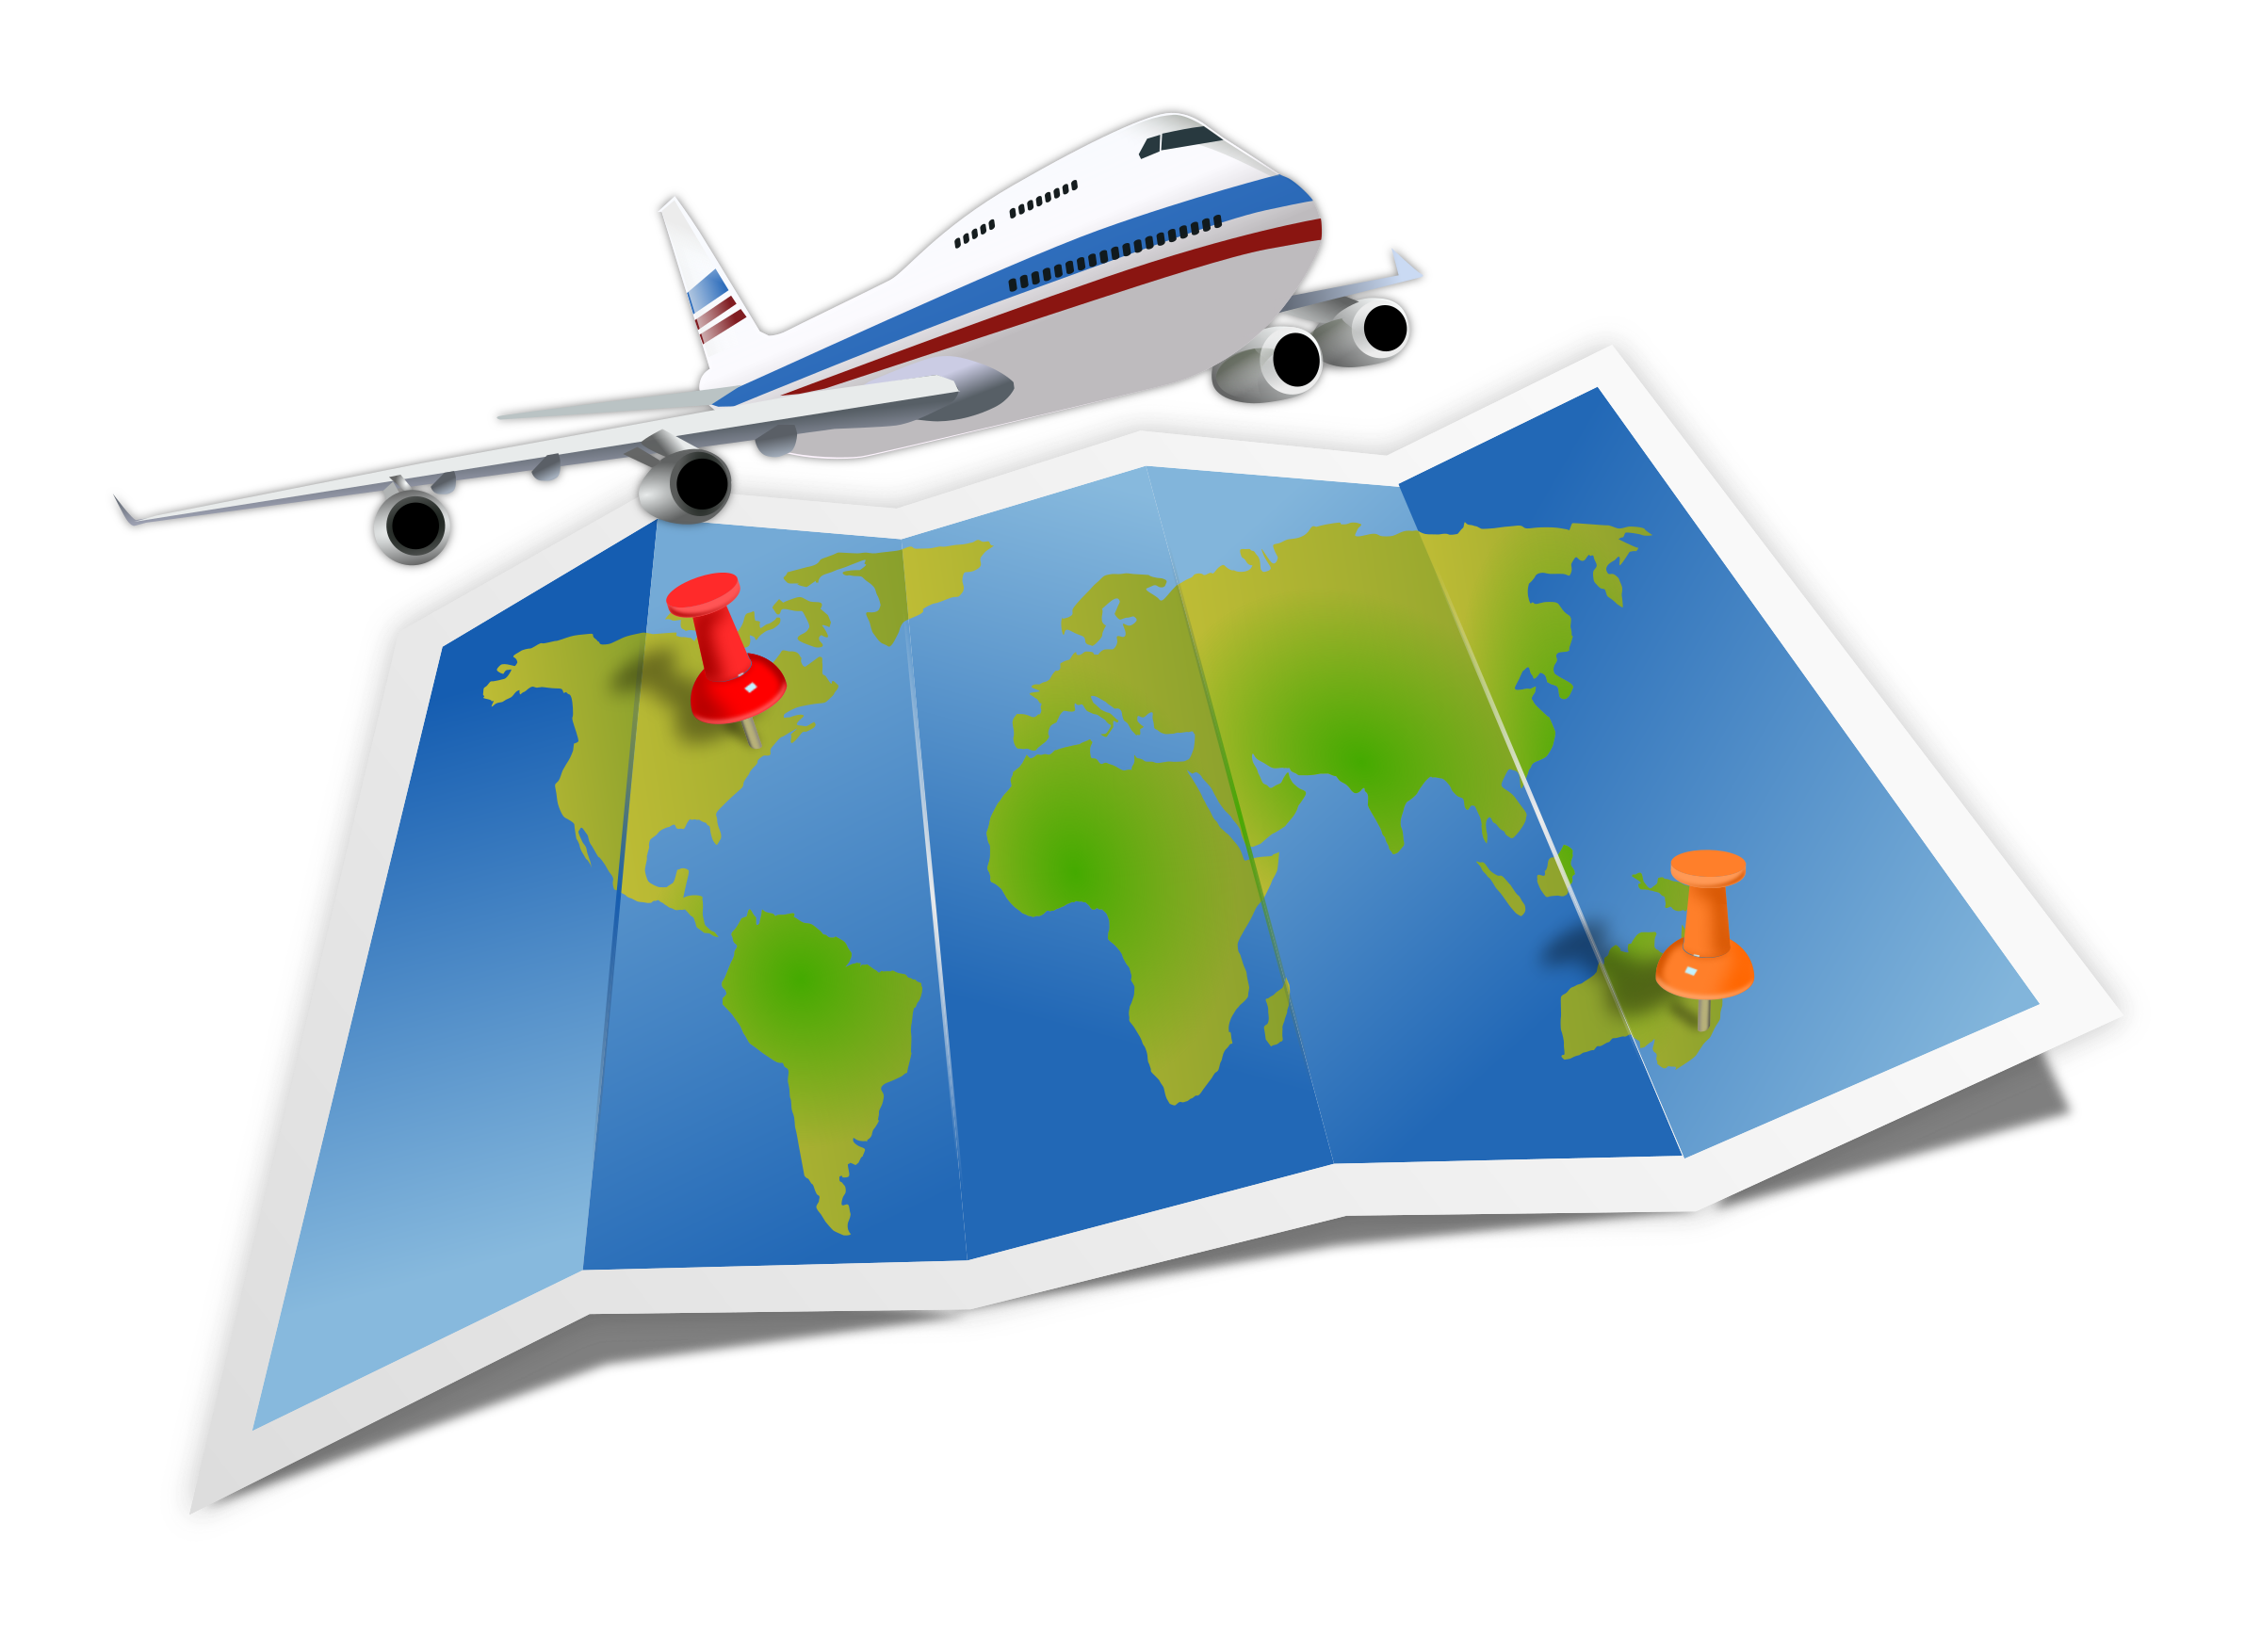 clipart map travel map